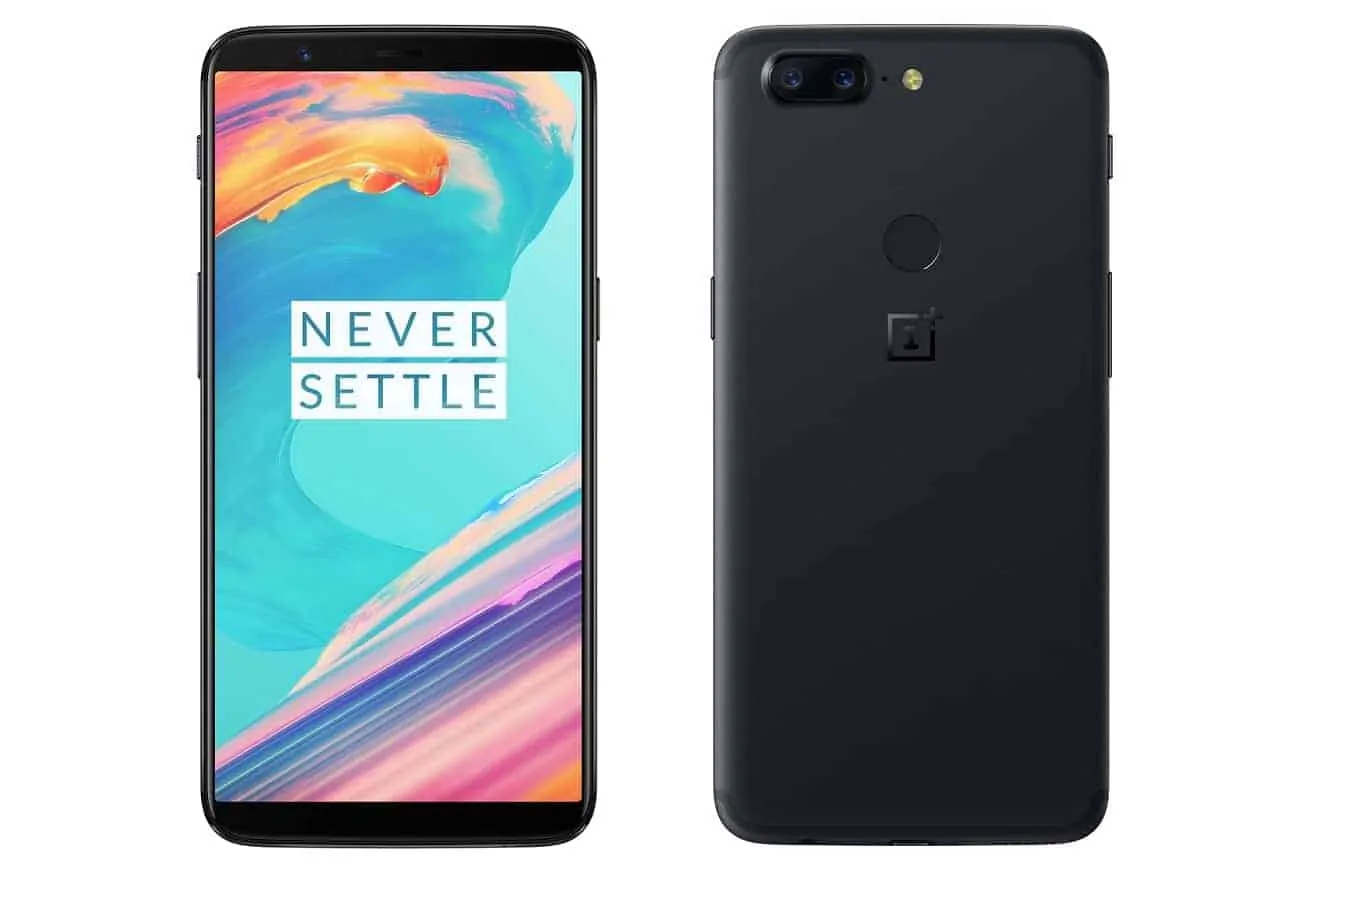 Featured image for OnePlus 5T Now Official With 18:9 Aspect Ratio, Better Cameras